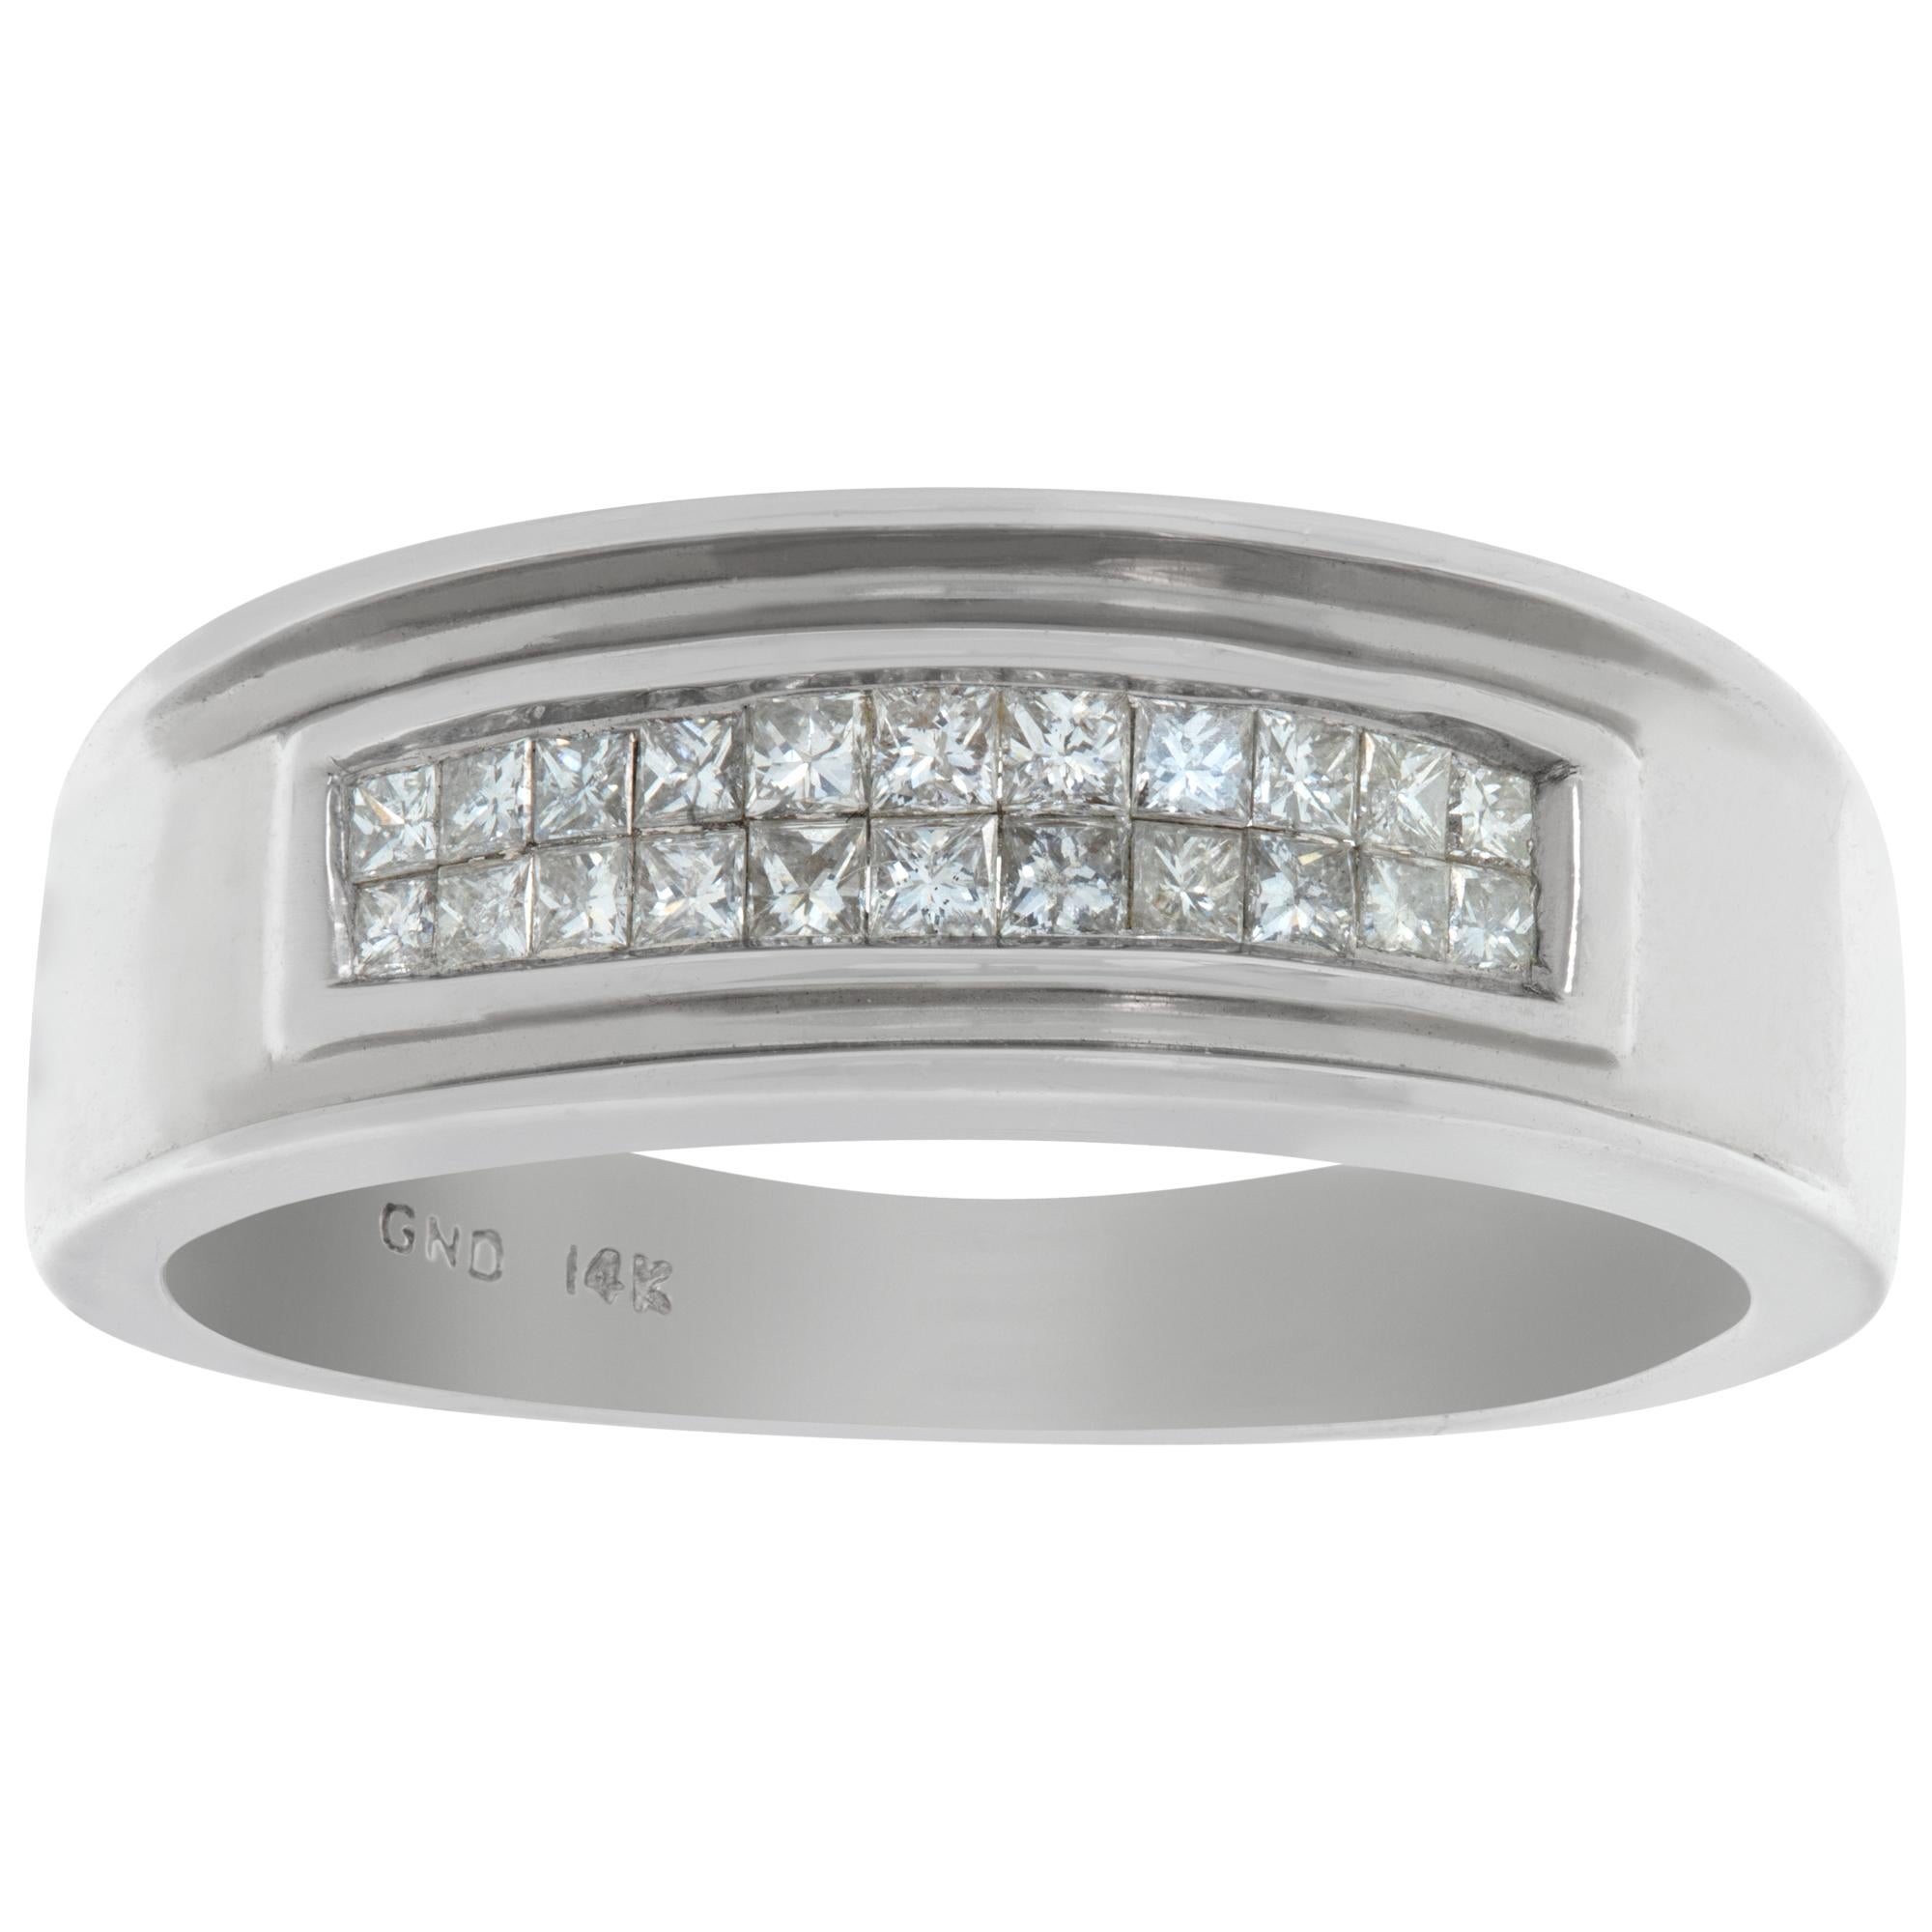 Invisible set princess-cut diamond ring in 14k white gold with approximatley 0.88 carat in diamonds. Size 11, head measures 8.1mm,  shank measures 3.3mm.This Diamond ring is currently size 11 and some items can be sized up or down, please ask! It